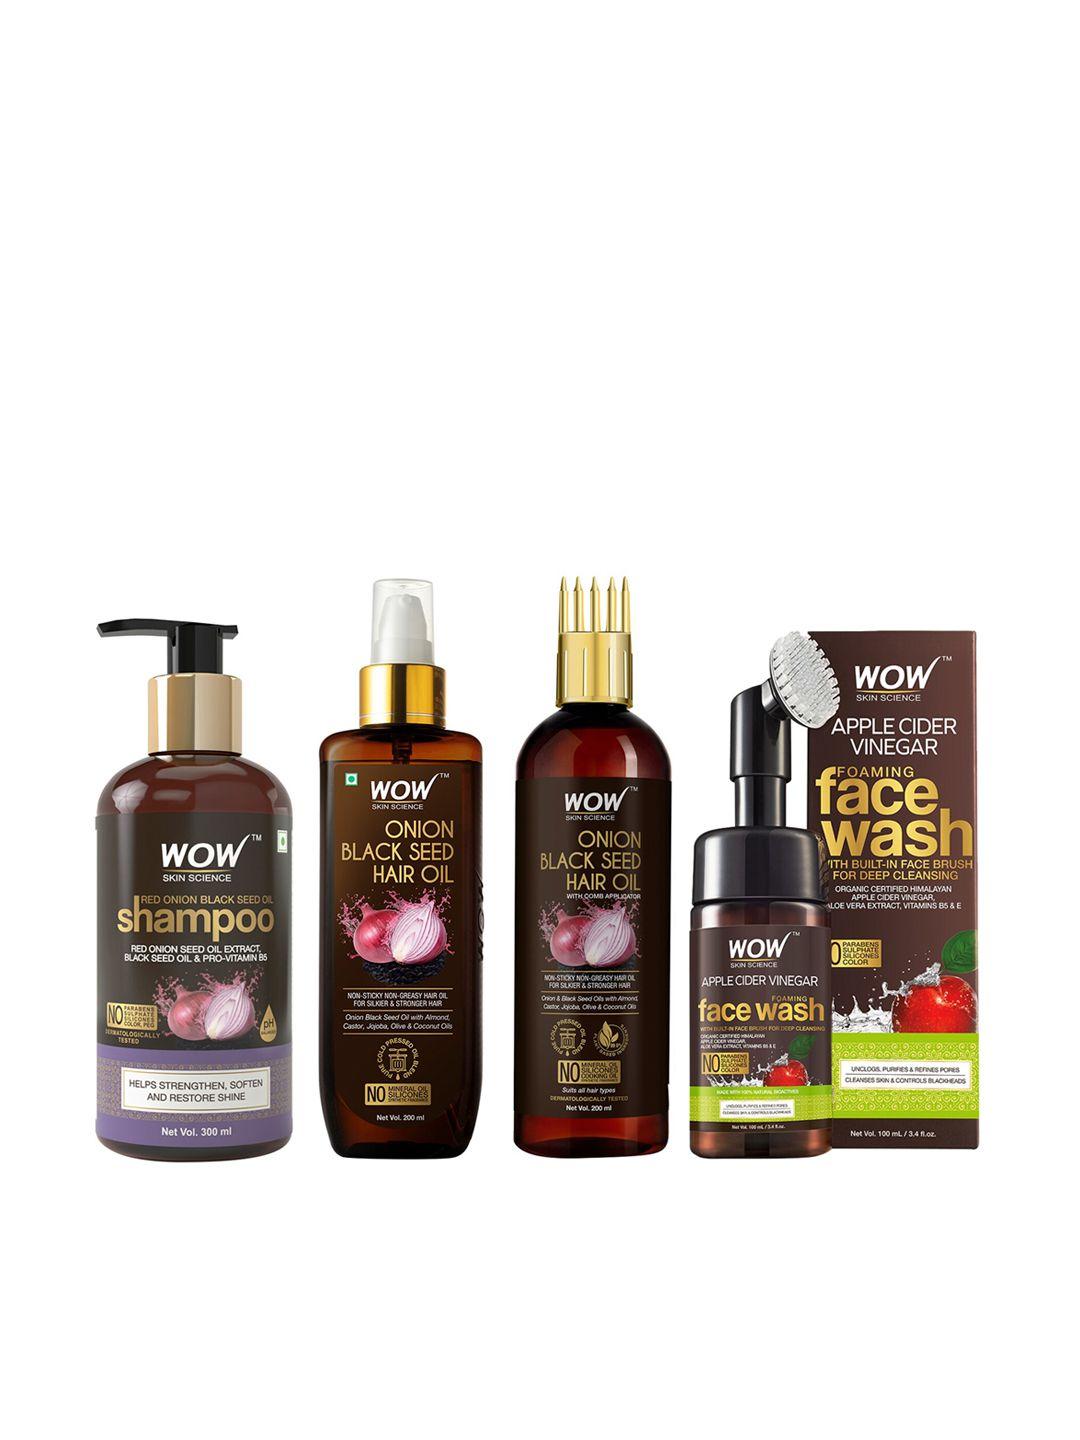 wow skin science set of shampoo, hair oil & foaming face wash